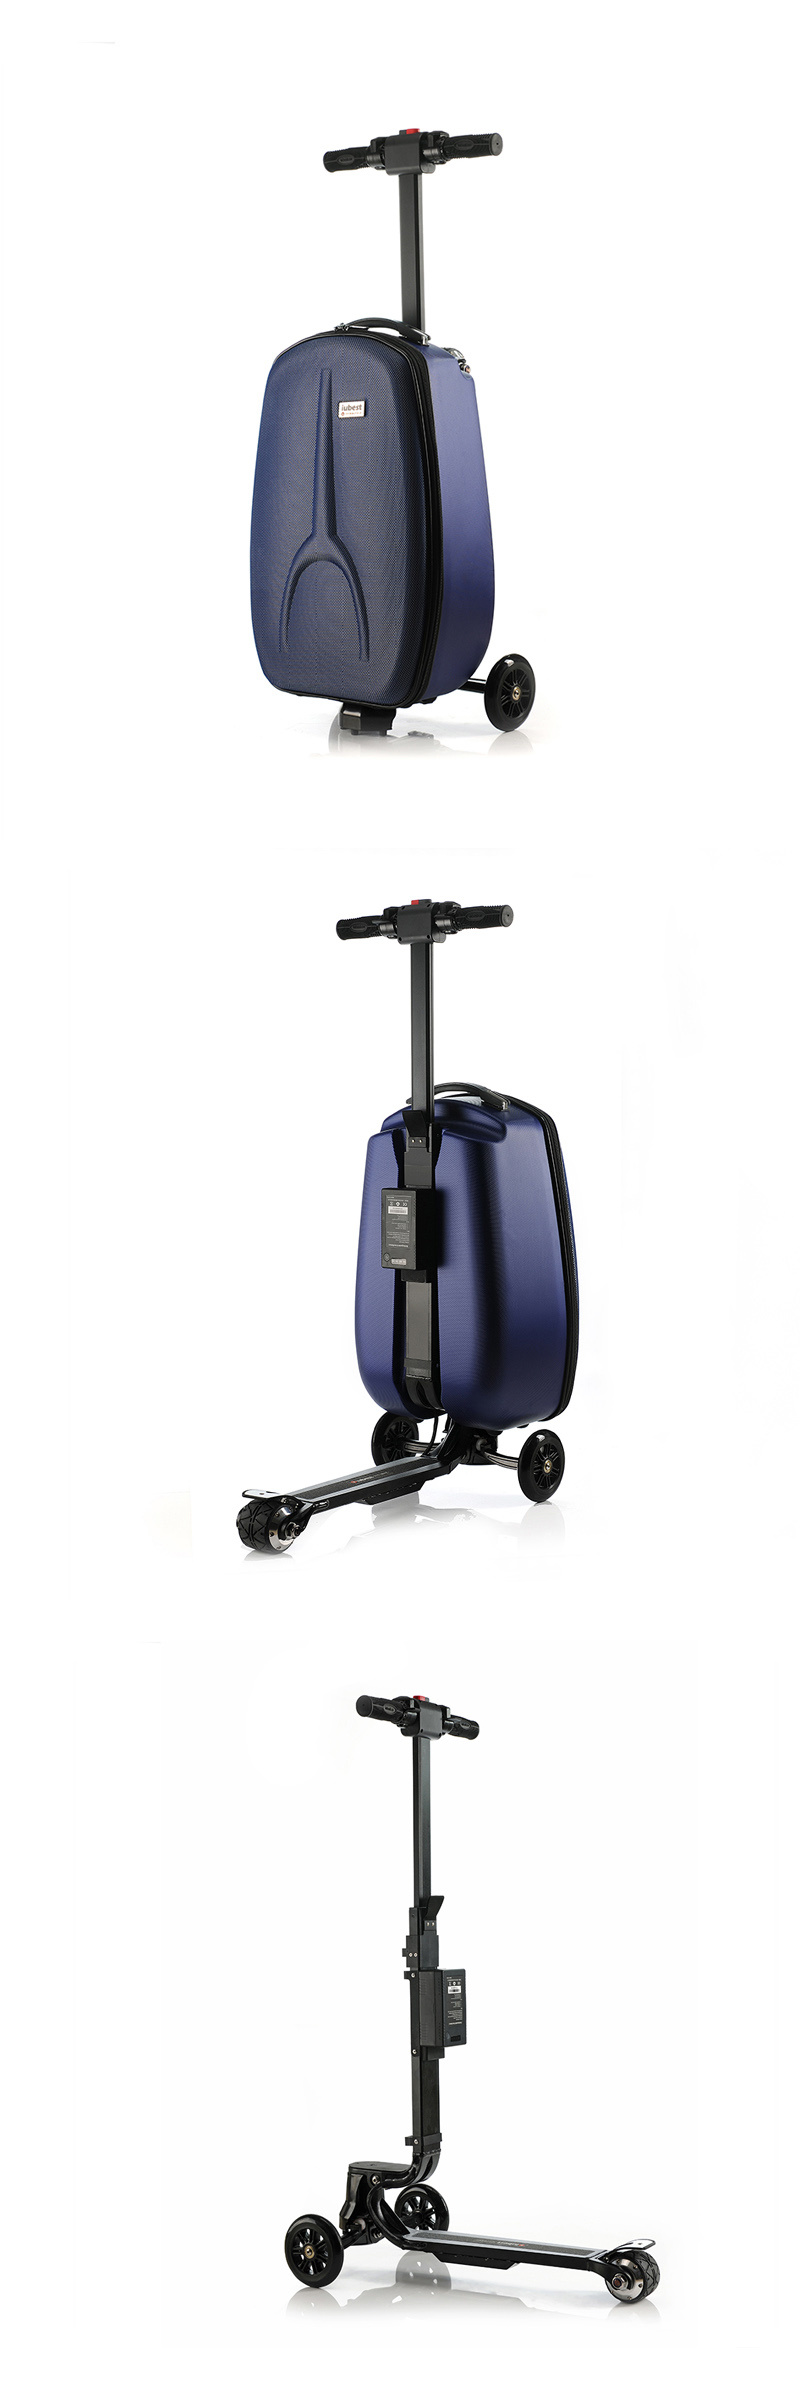 Smartek New Model Big Wheels Luggage Scooters Patinete Electrico -Luggage Bag to Travelling - Without Battery S-B1